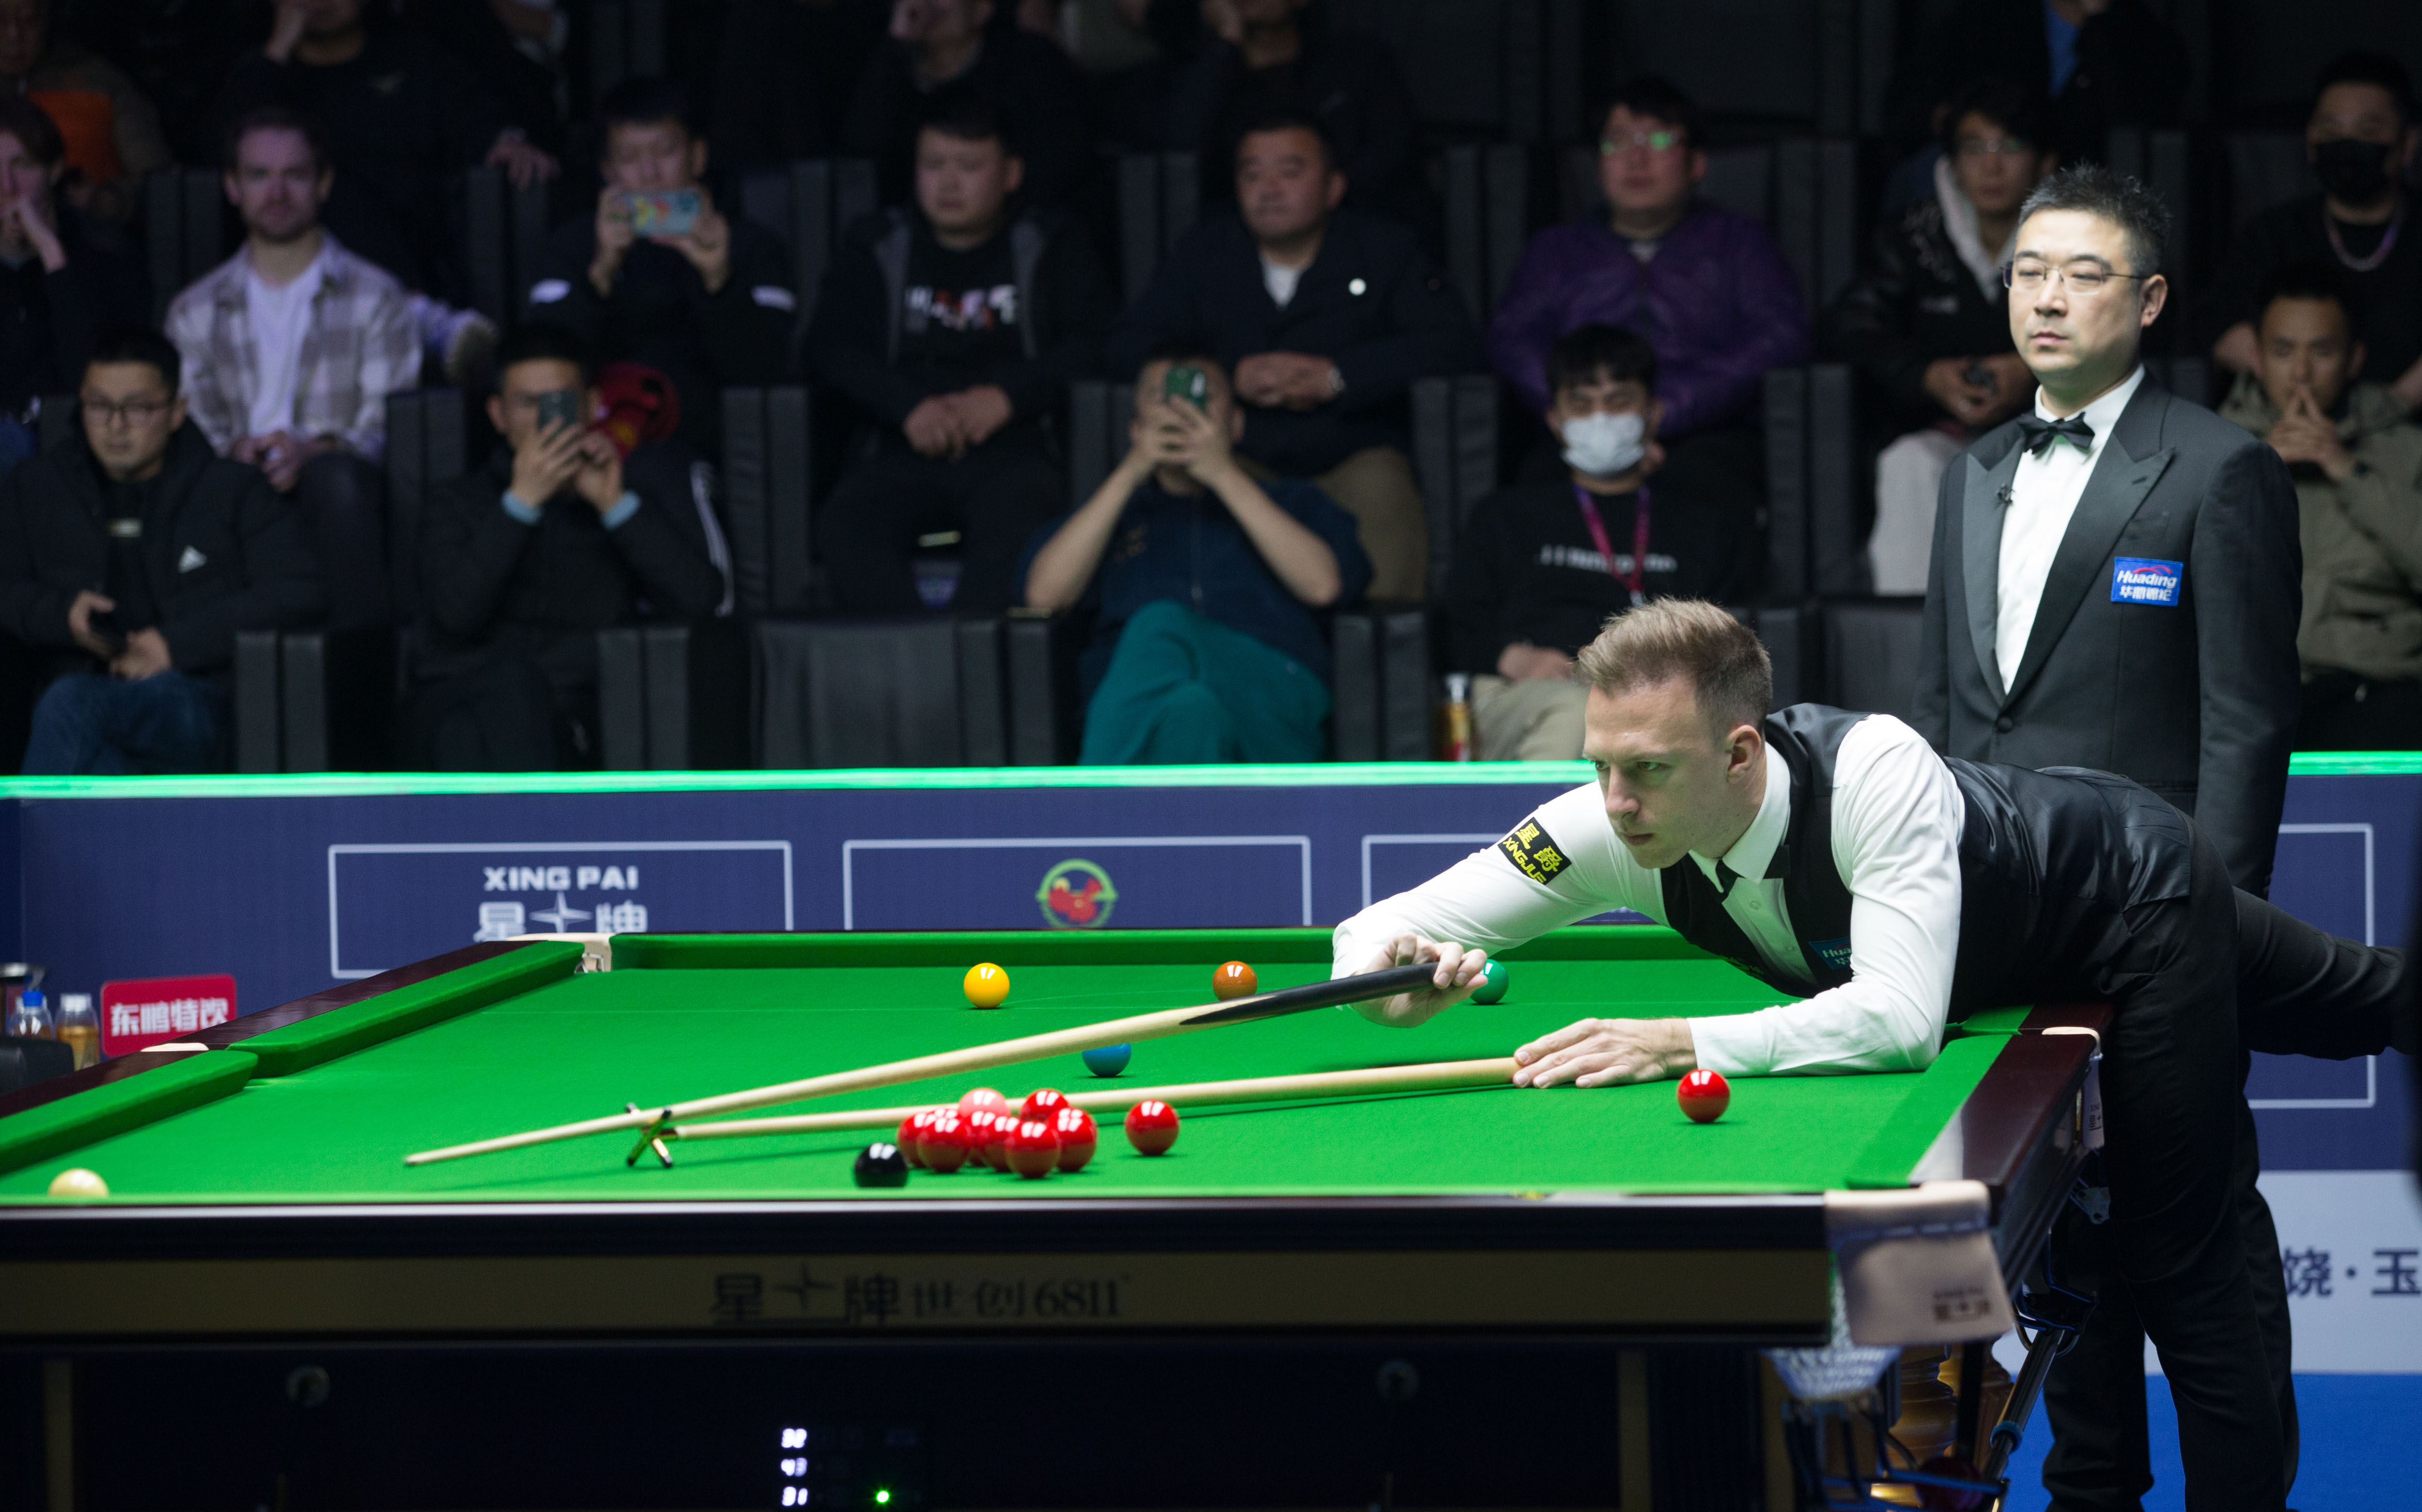 Snooker World Open returns to China with stellar lineup